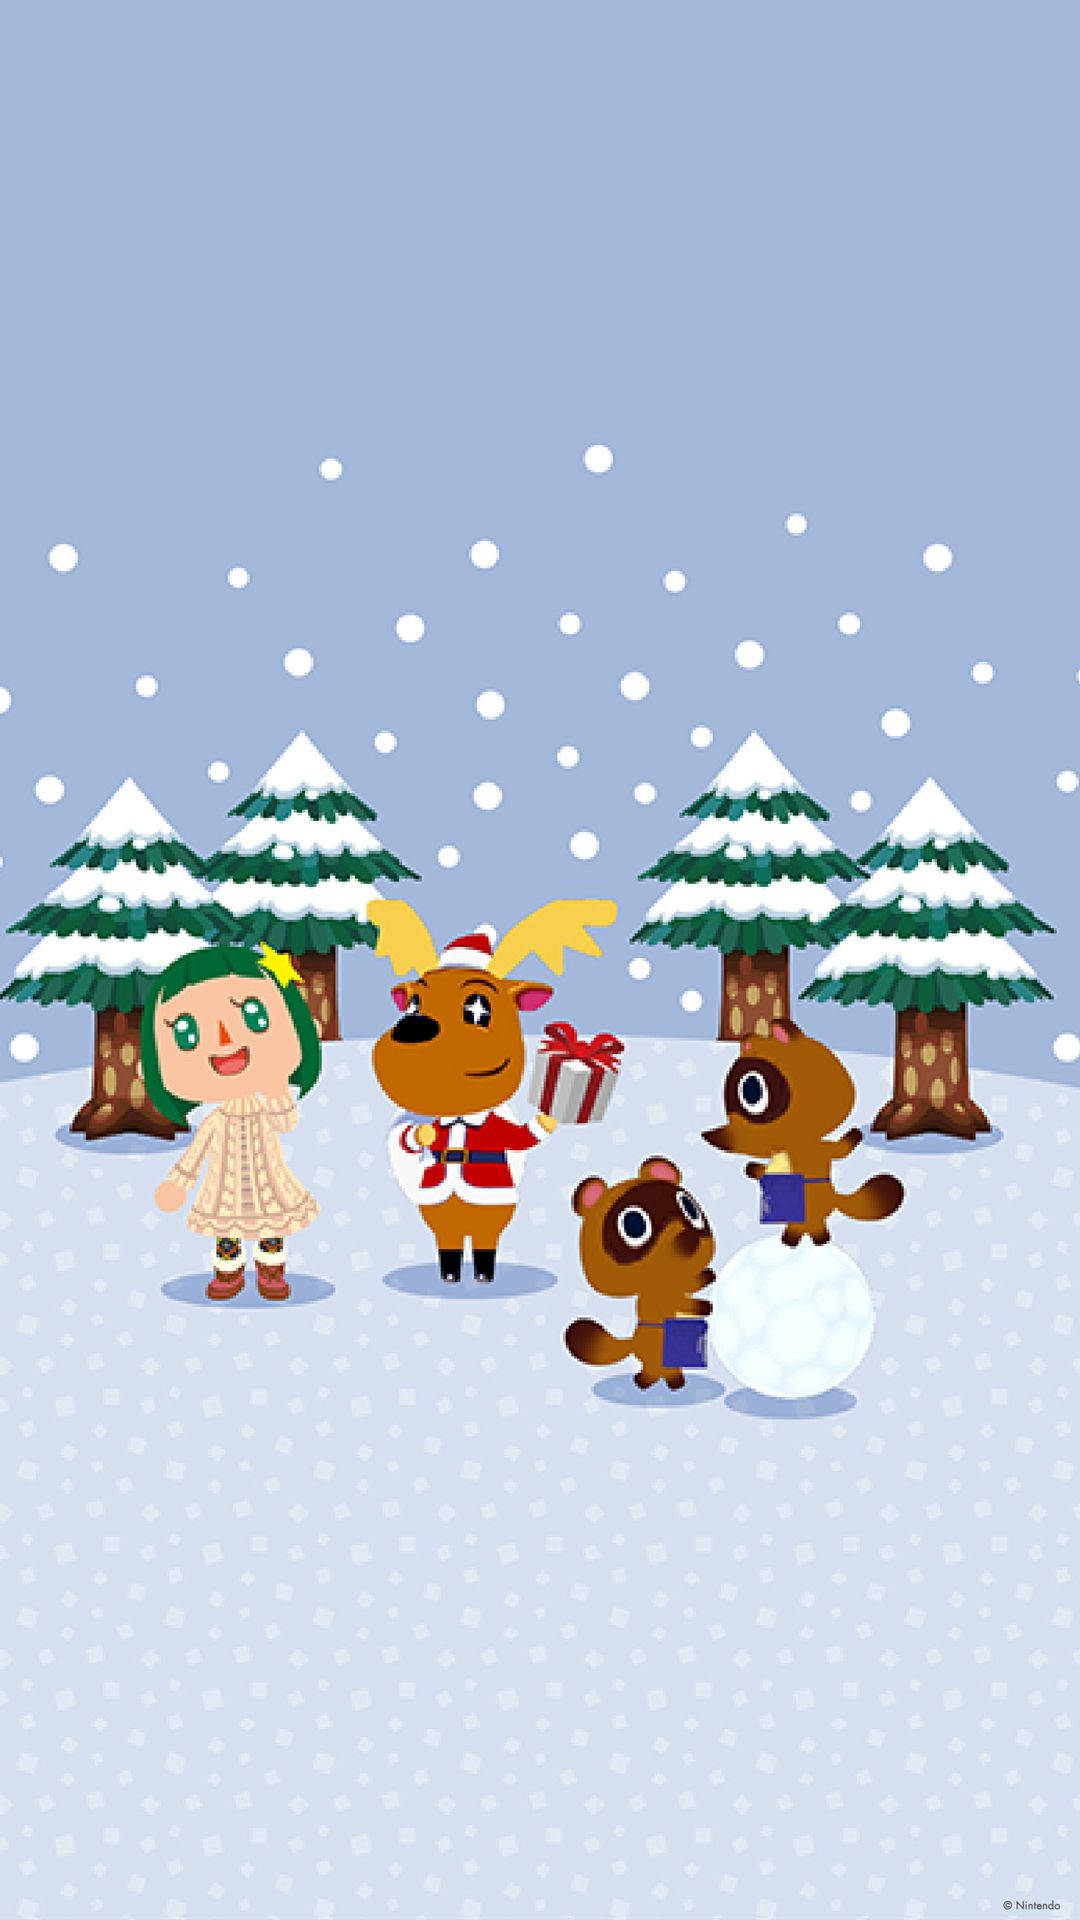 All Quiet on the Snowy Animal Crossing Island Wallpaper